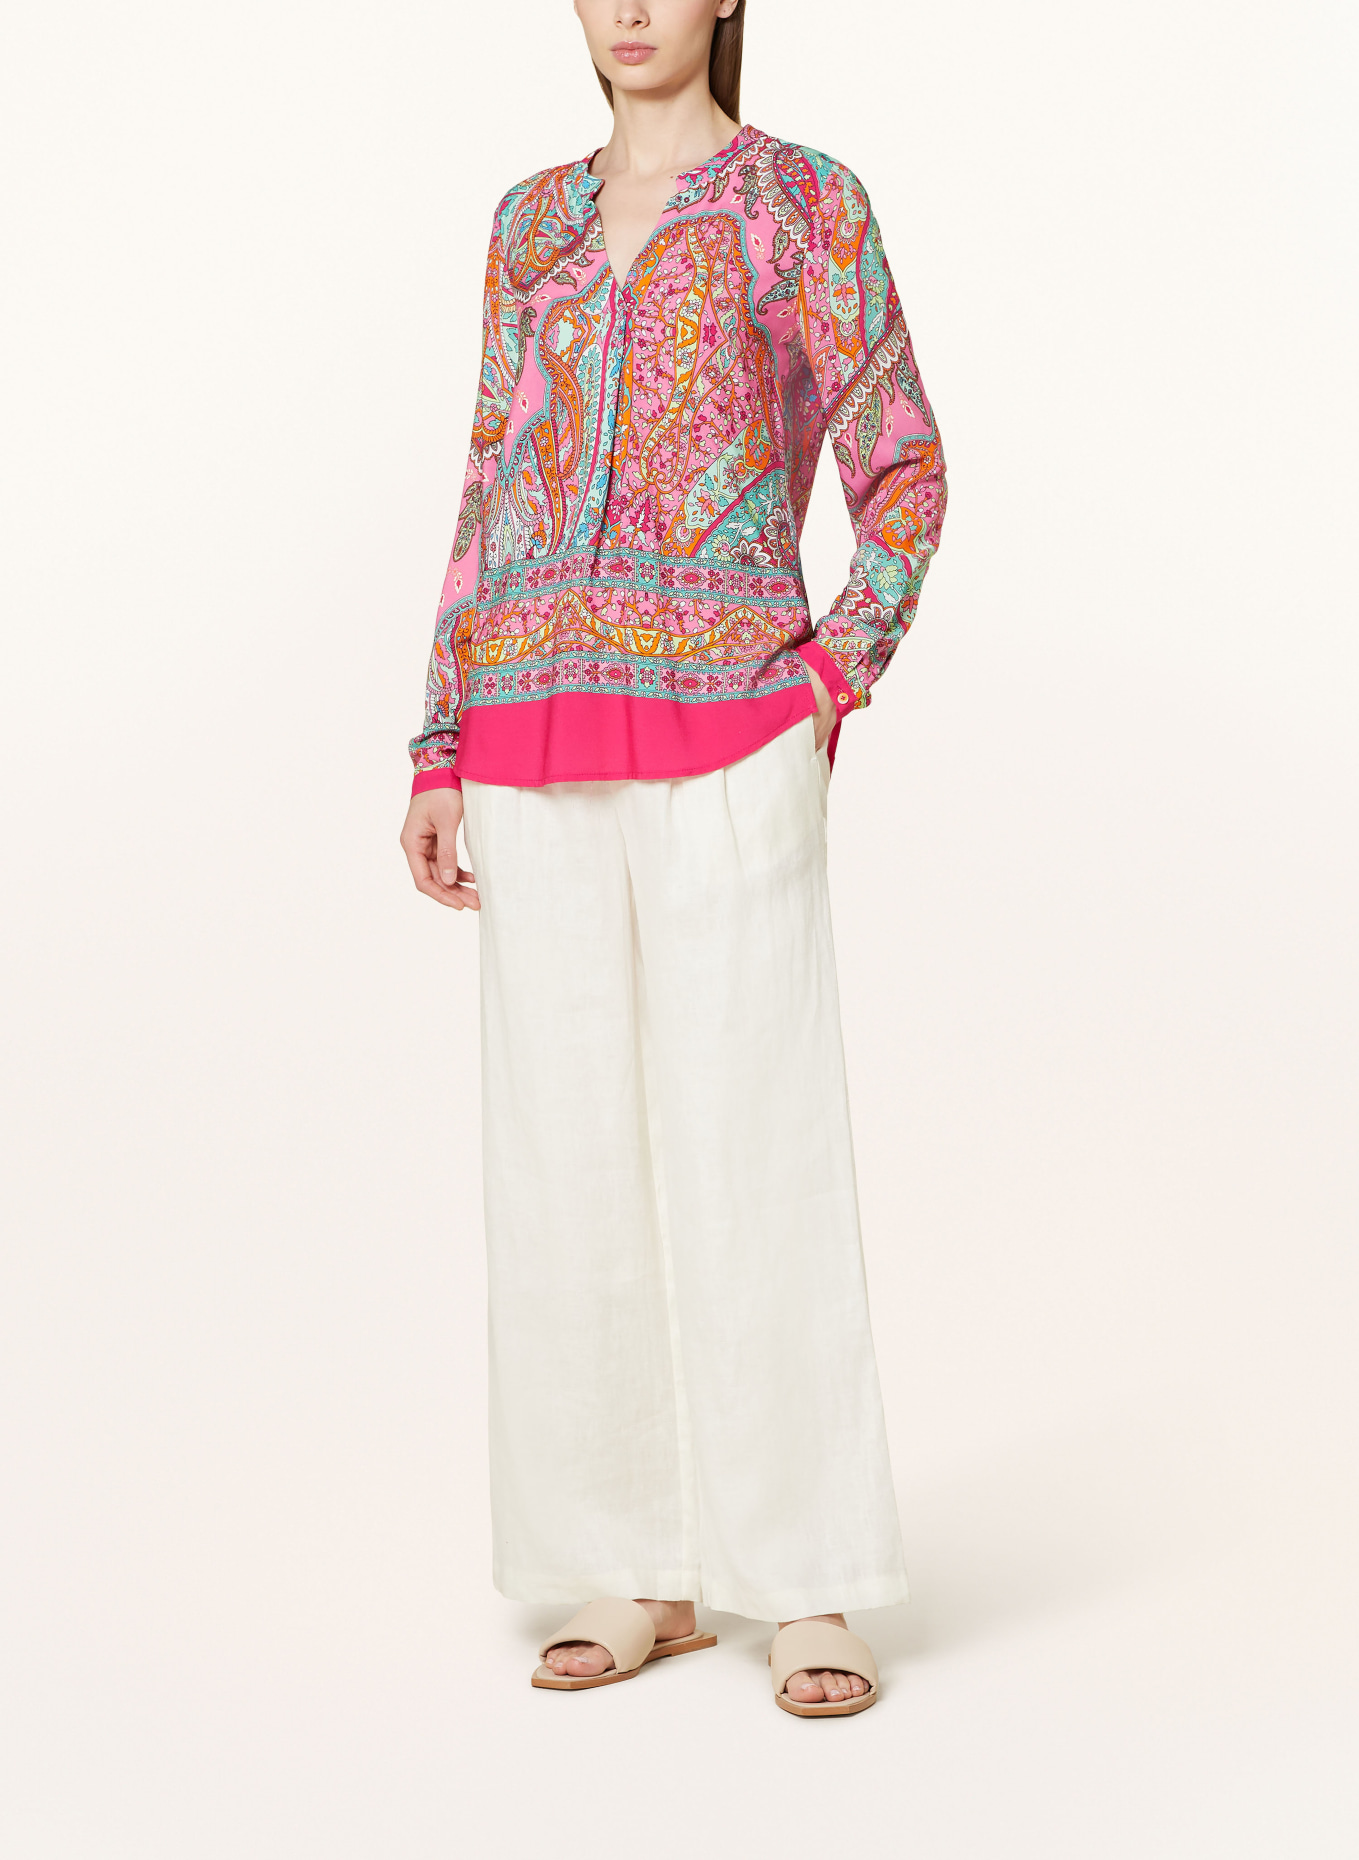 Emily VAN DEN BERGH Shirt blouse with 3/4 sleeves, Color: PINK/ PINK/ LIGHT GREEN (Image 2)